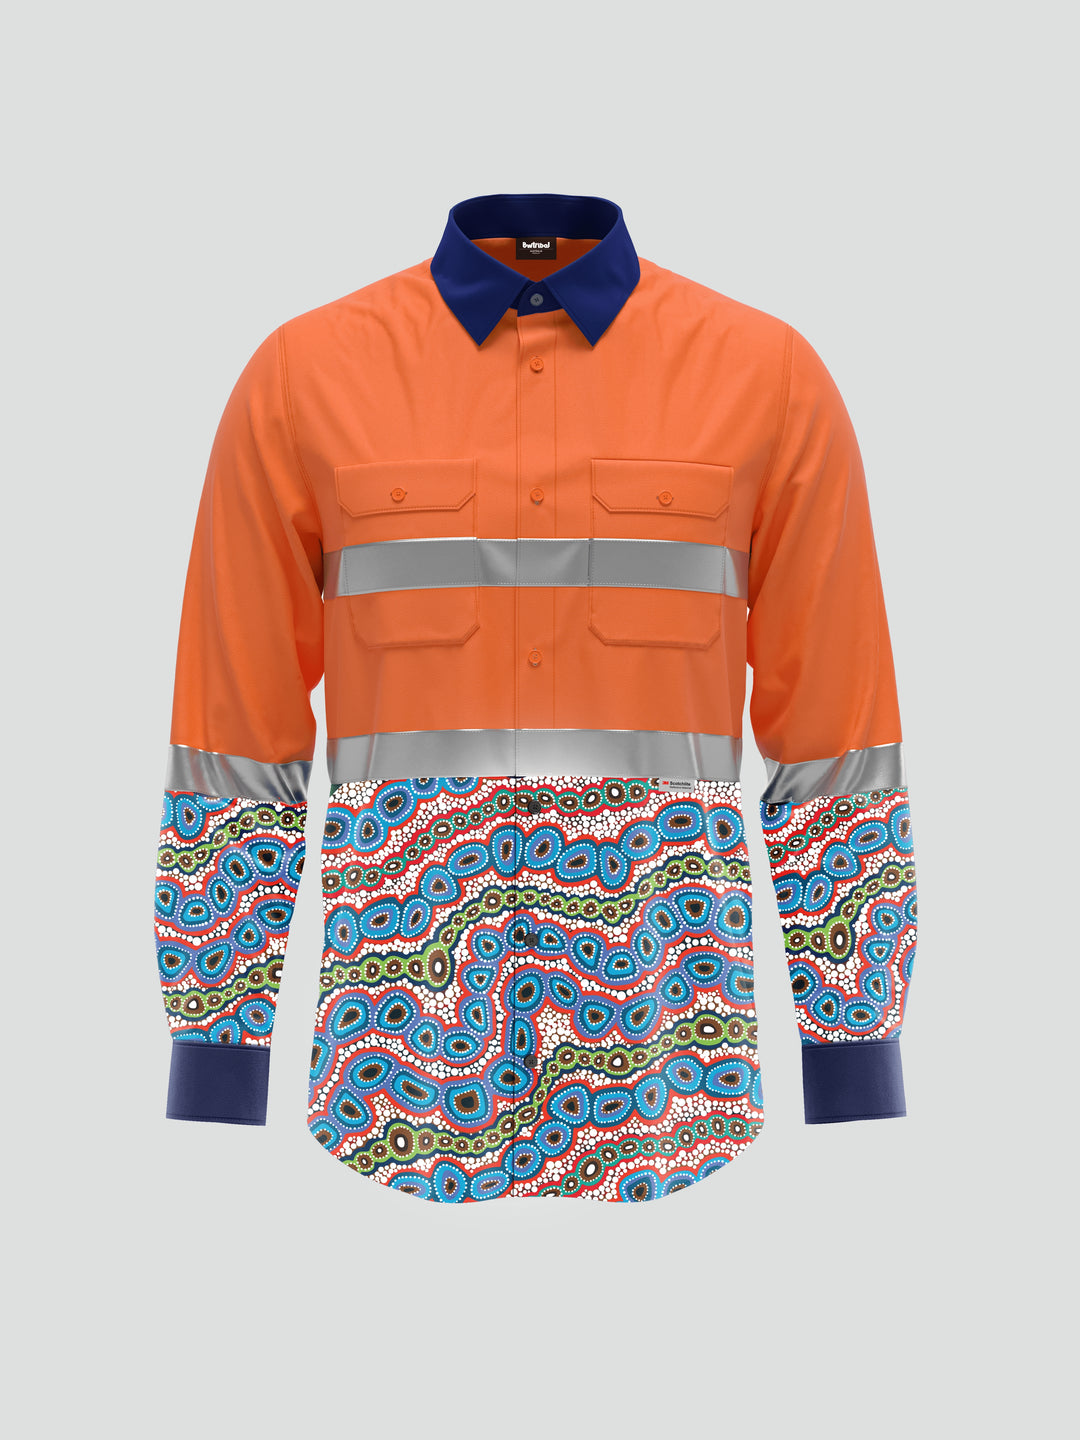 Contours of Country - Corporate Hi-Vis Unisex Workwear Shirt